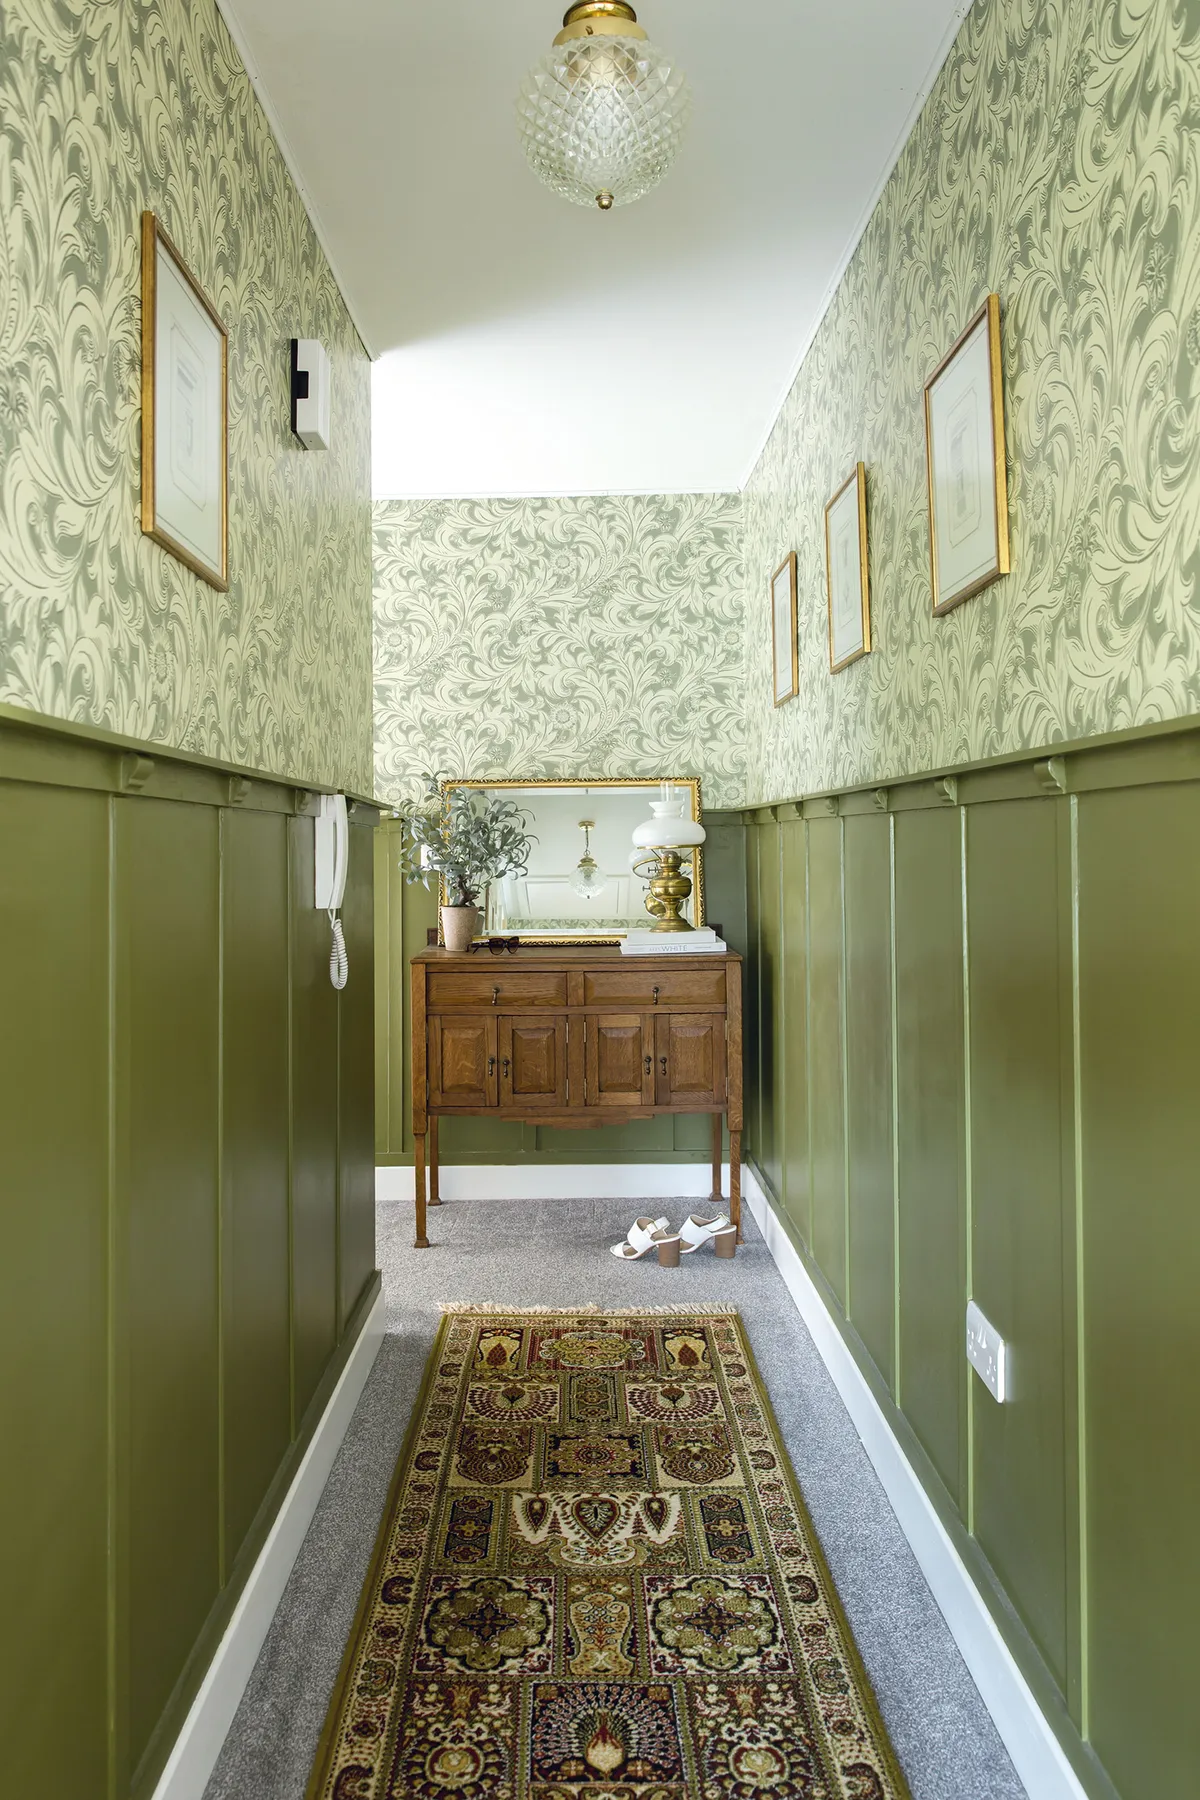 The wallpaper, from Wayfair, sits perfectly above wall panelling painted in Farrow & Ball’s Bancha. The floor runner was a hand-me-down from some family friends, while the lights were just £5 on Facebook Marketplace